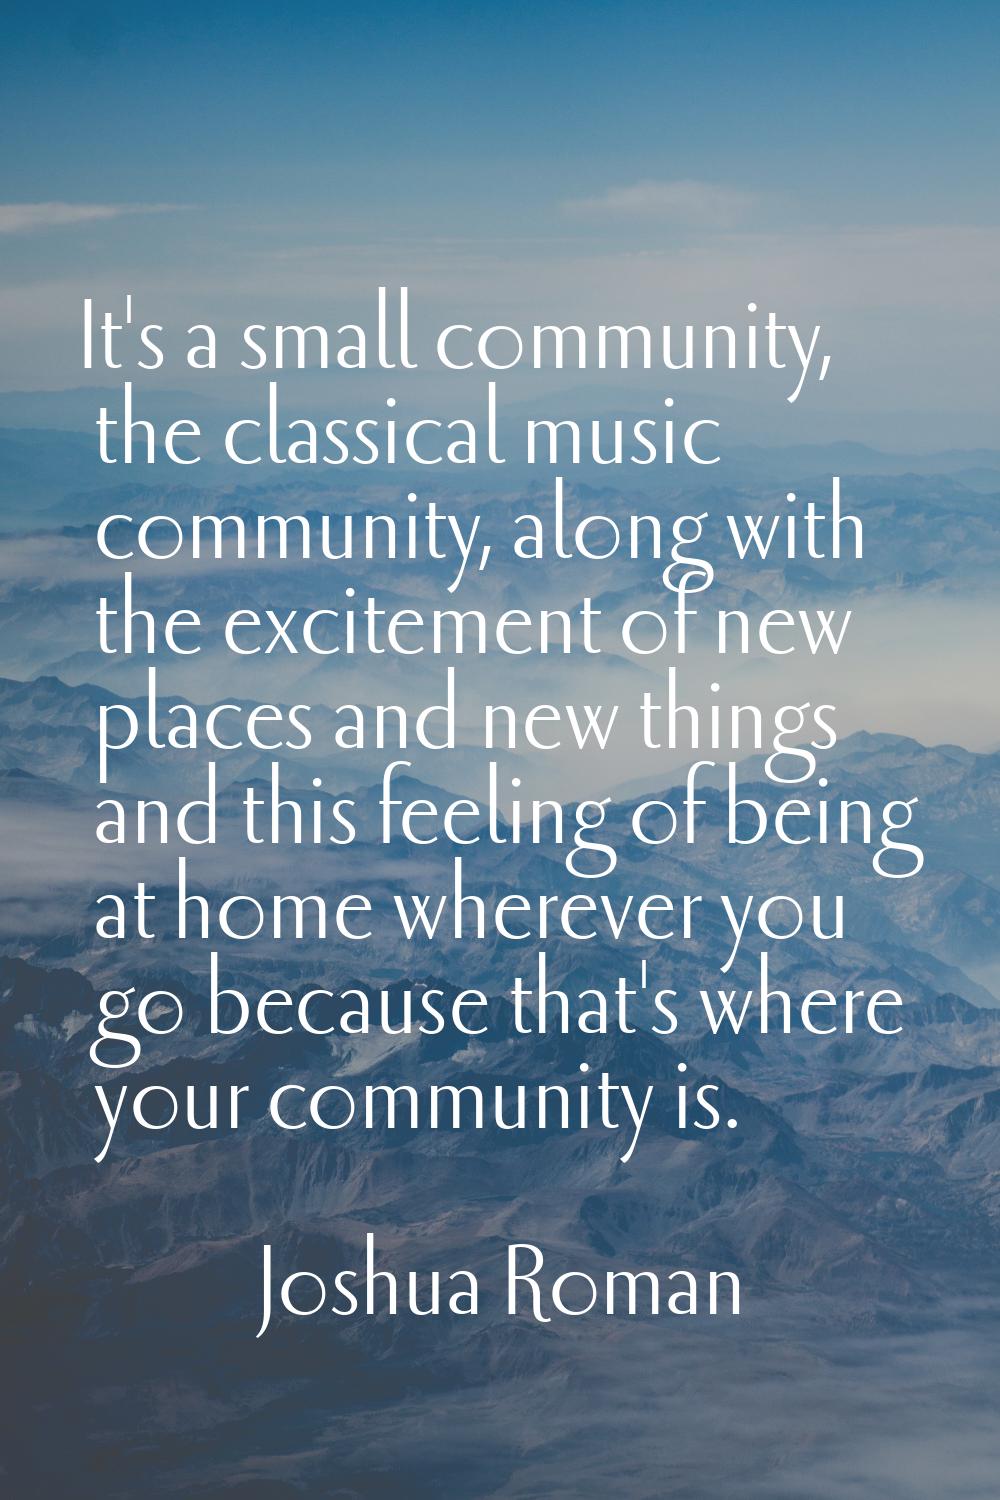 It's a small community, the classical music community, along with the excitement of new places and 